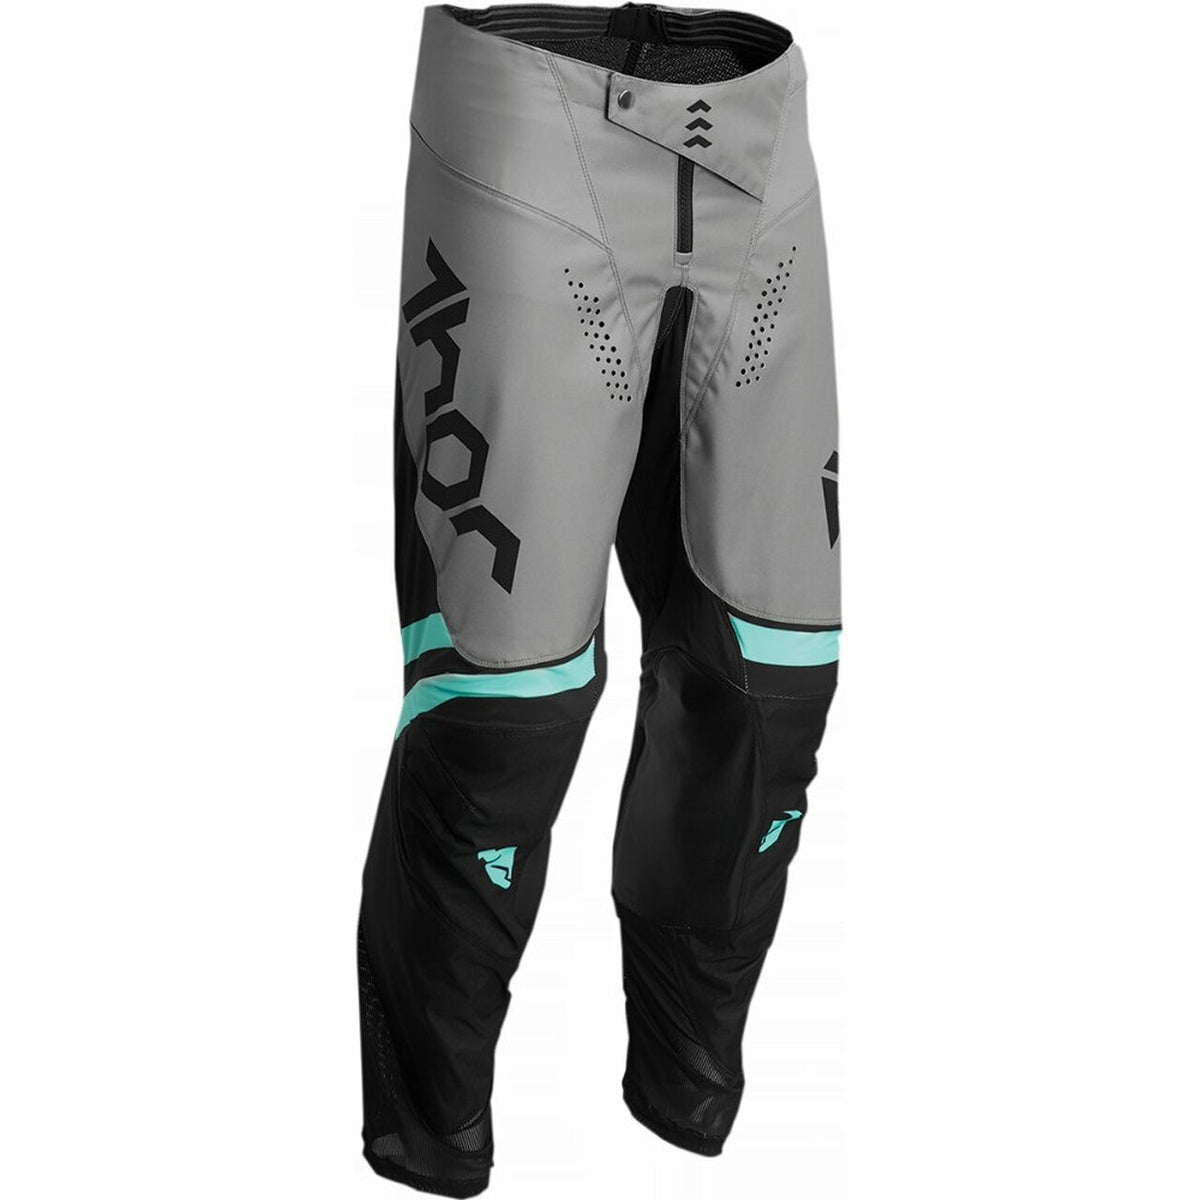 Thor Youth Pulse Cube Pants